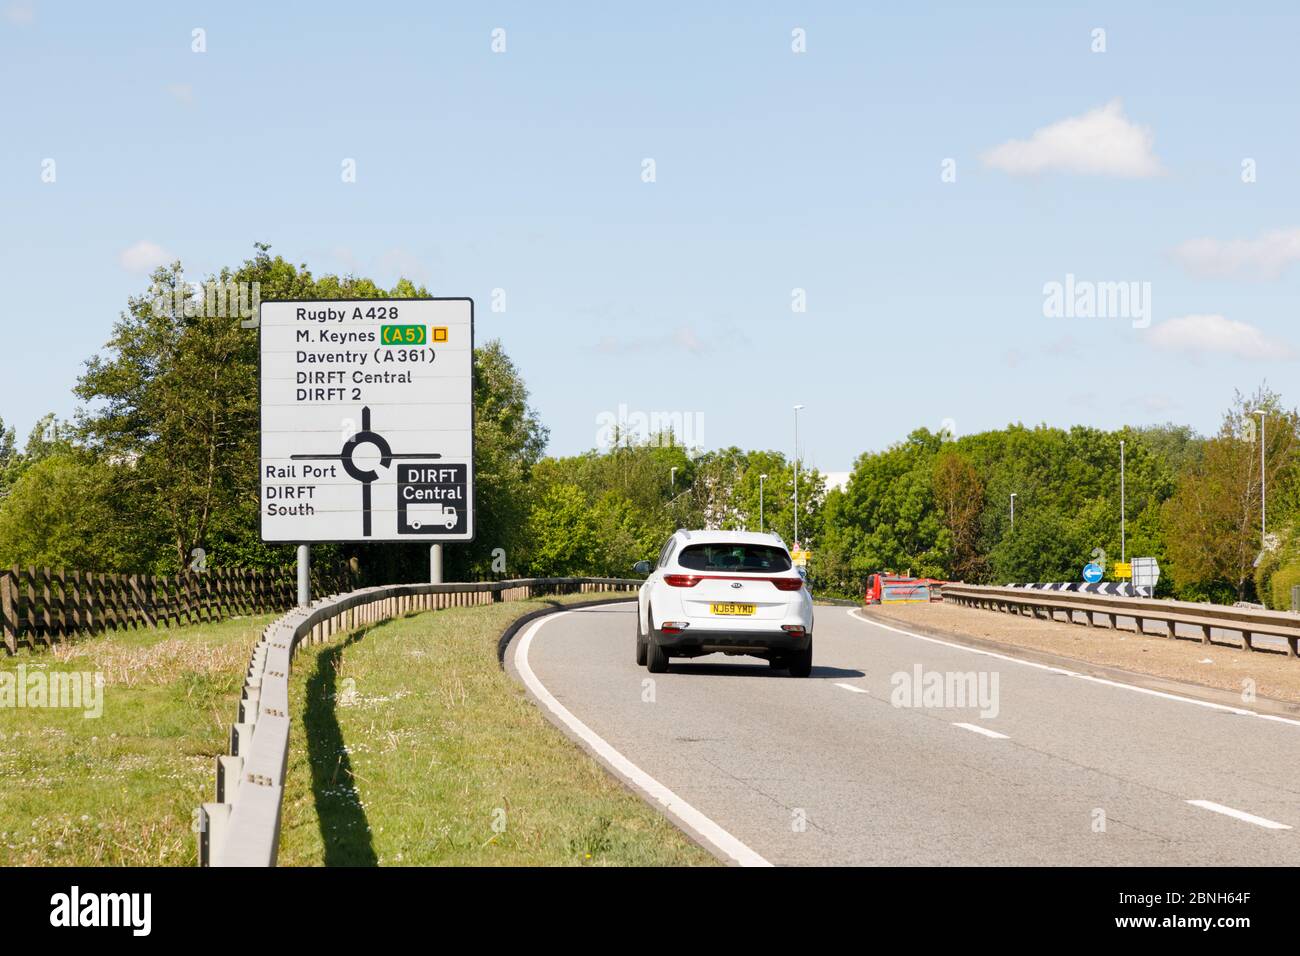 Crick, Northamptonshire, UK - May 2020: Car heads towards road sign with directions to areas of Daventry International Rail Frieght Terminal (DIRFT). Stock Photo